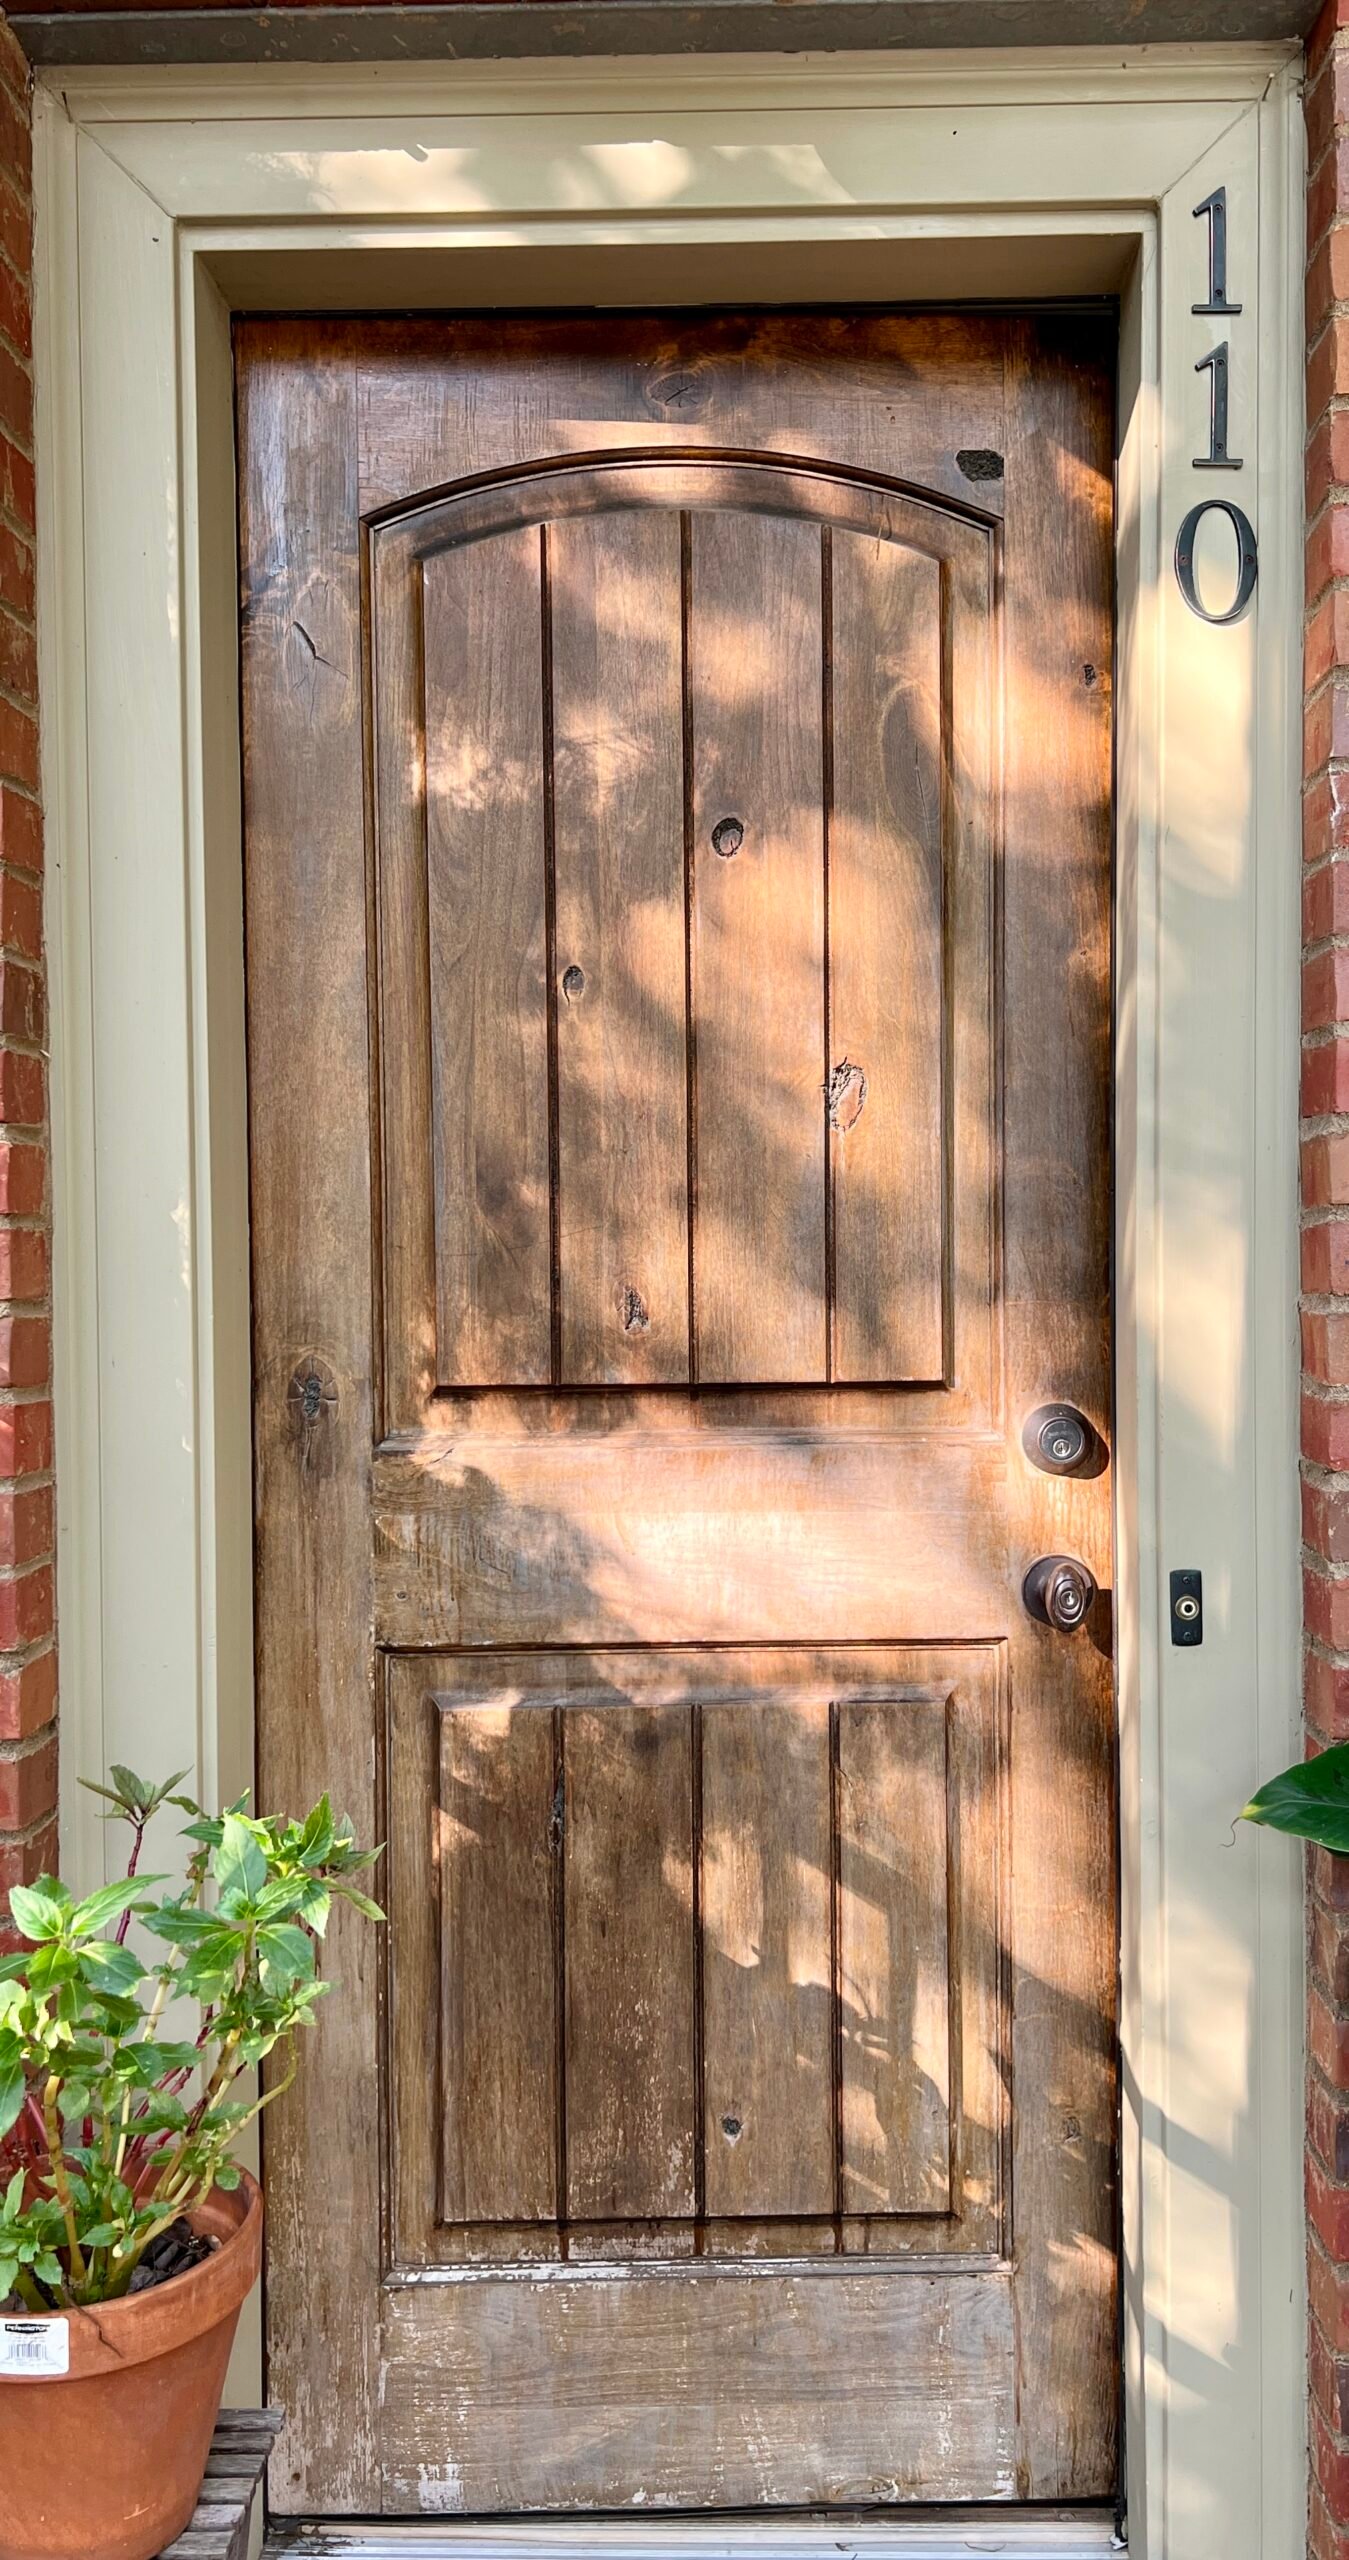 Old wooden door with a worn, weathered look